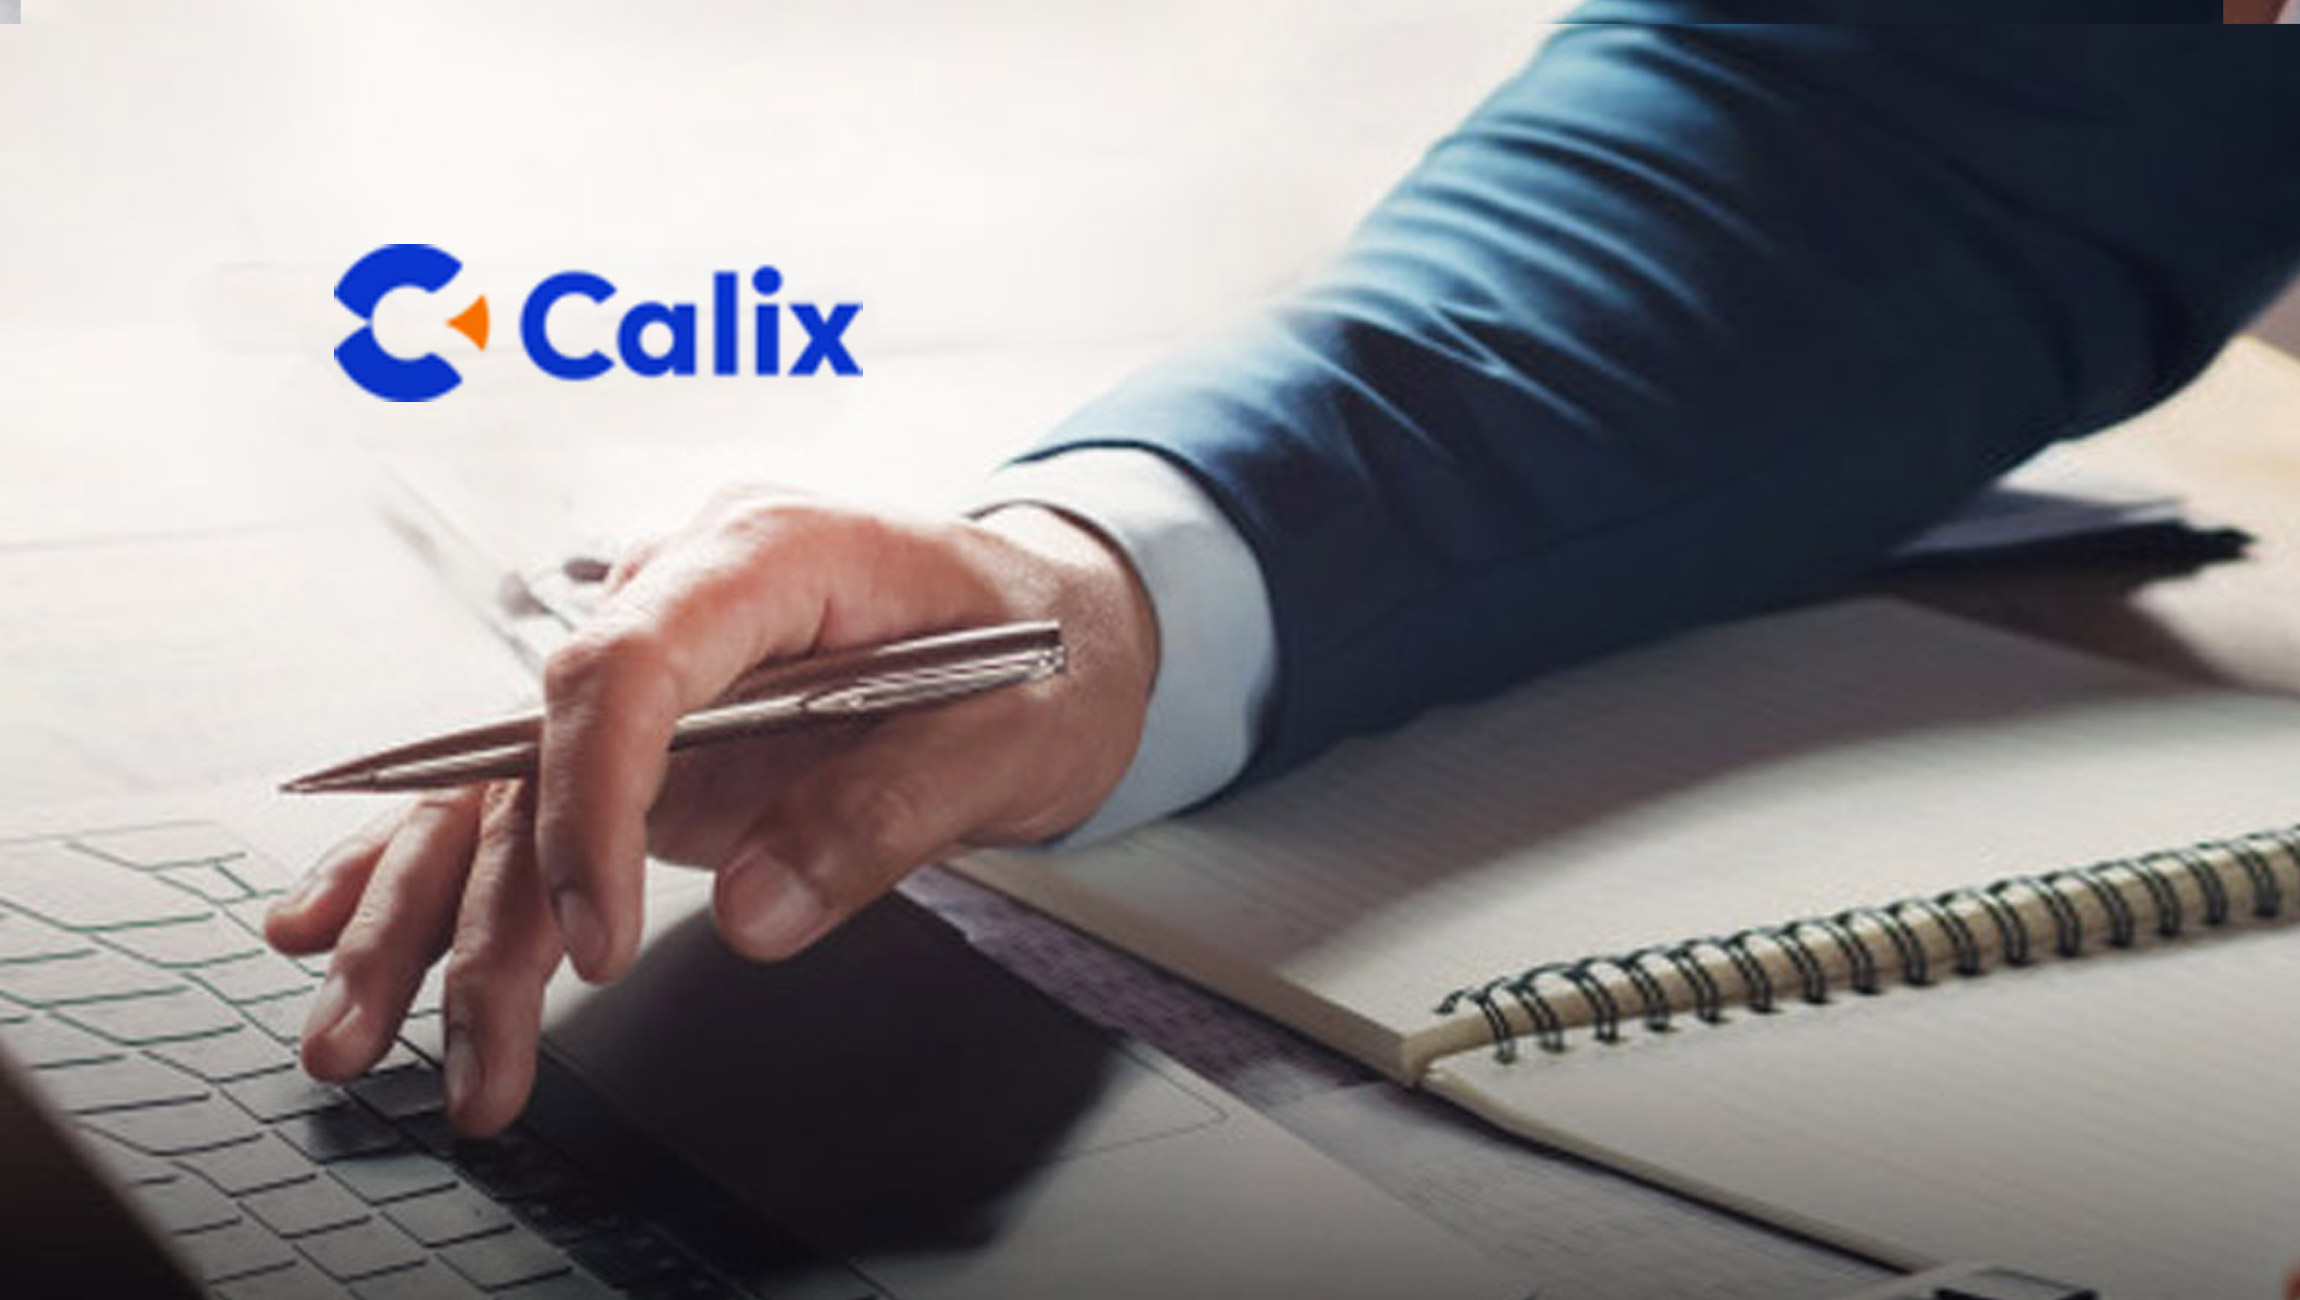 Calix Launches The Revenue EDGE Platform in the U.K. To Enable Altnets of All Sizes To Deliver Exceptional Experiences that Will Create New Revenue Streams and Increase Net Promoter Scores